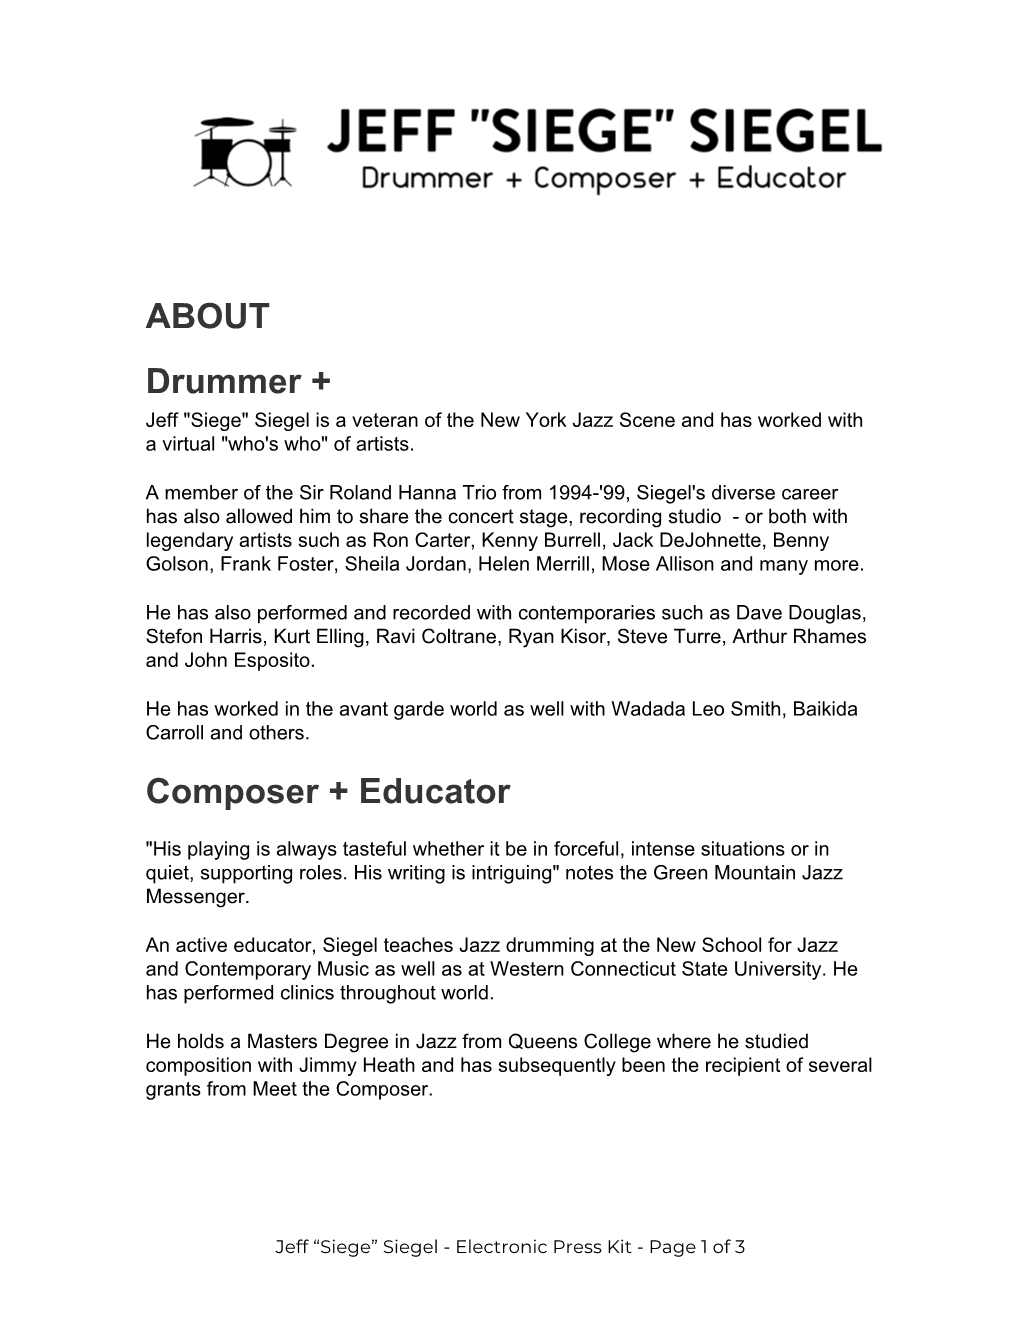 ABOUT Drummer + Composer + Educator